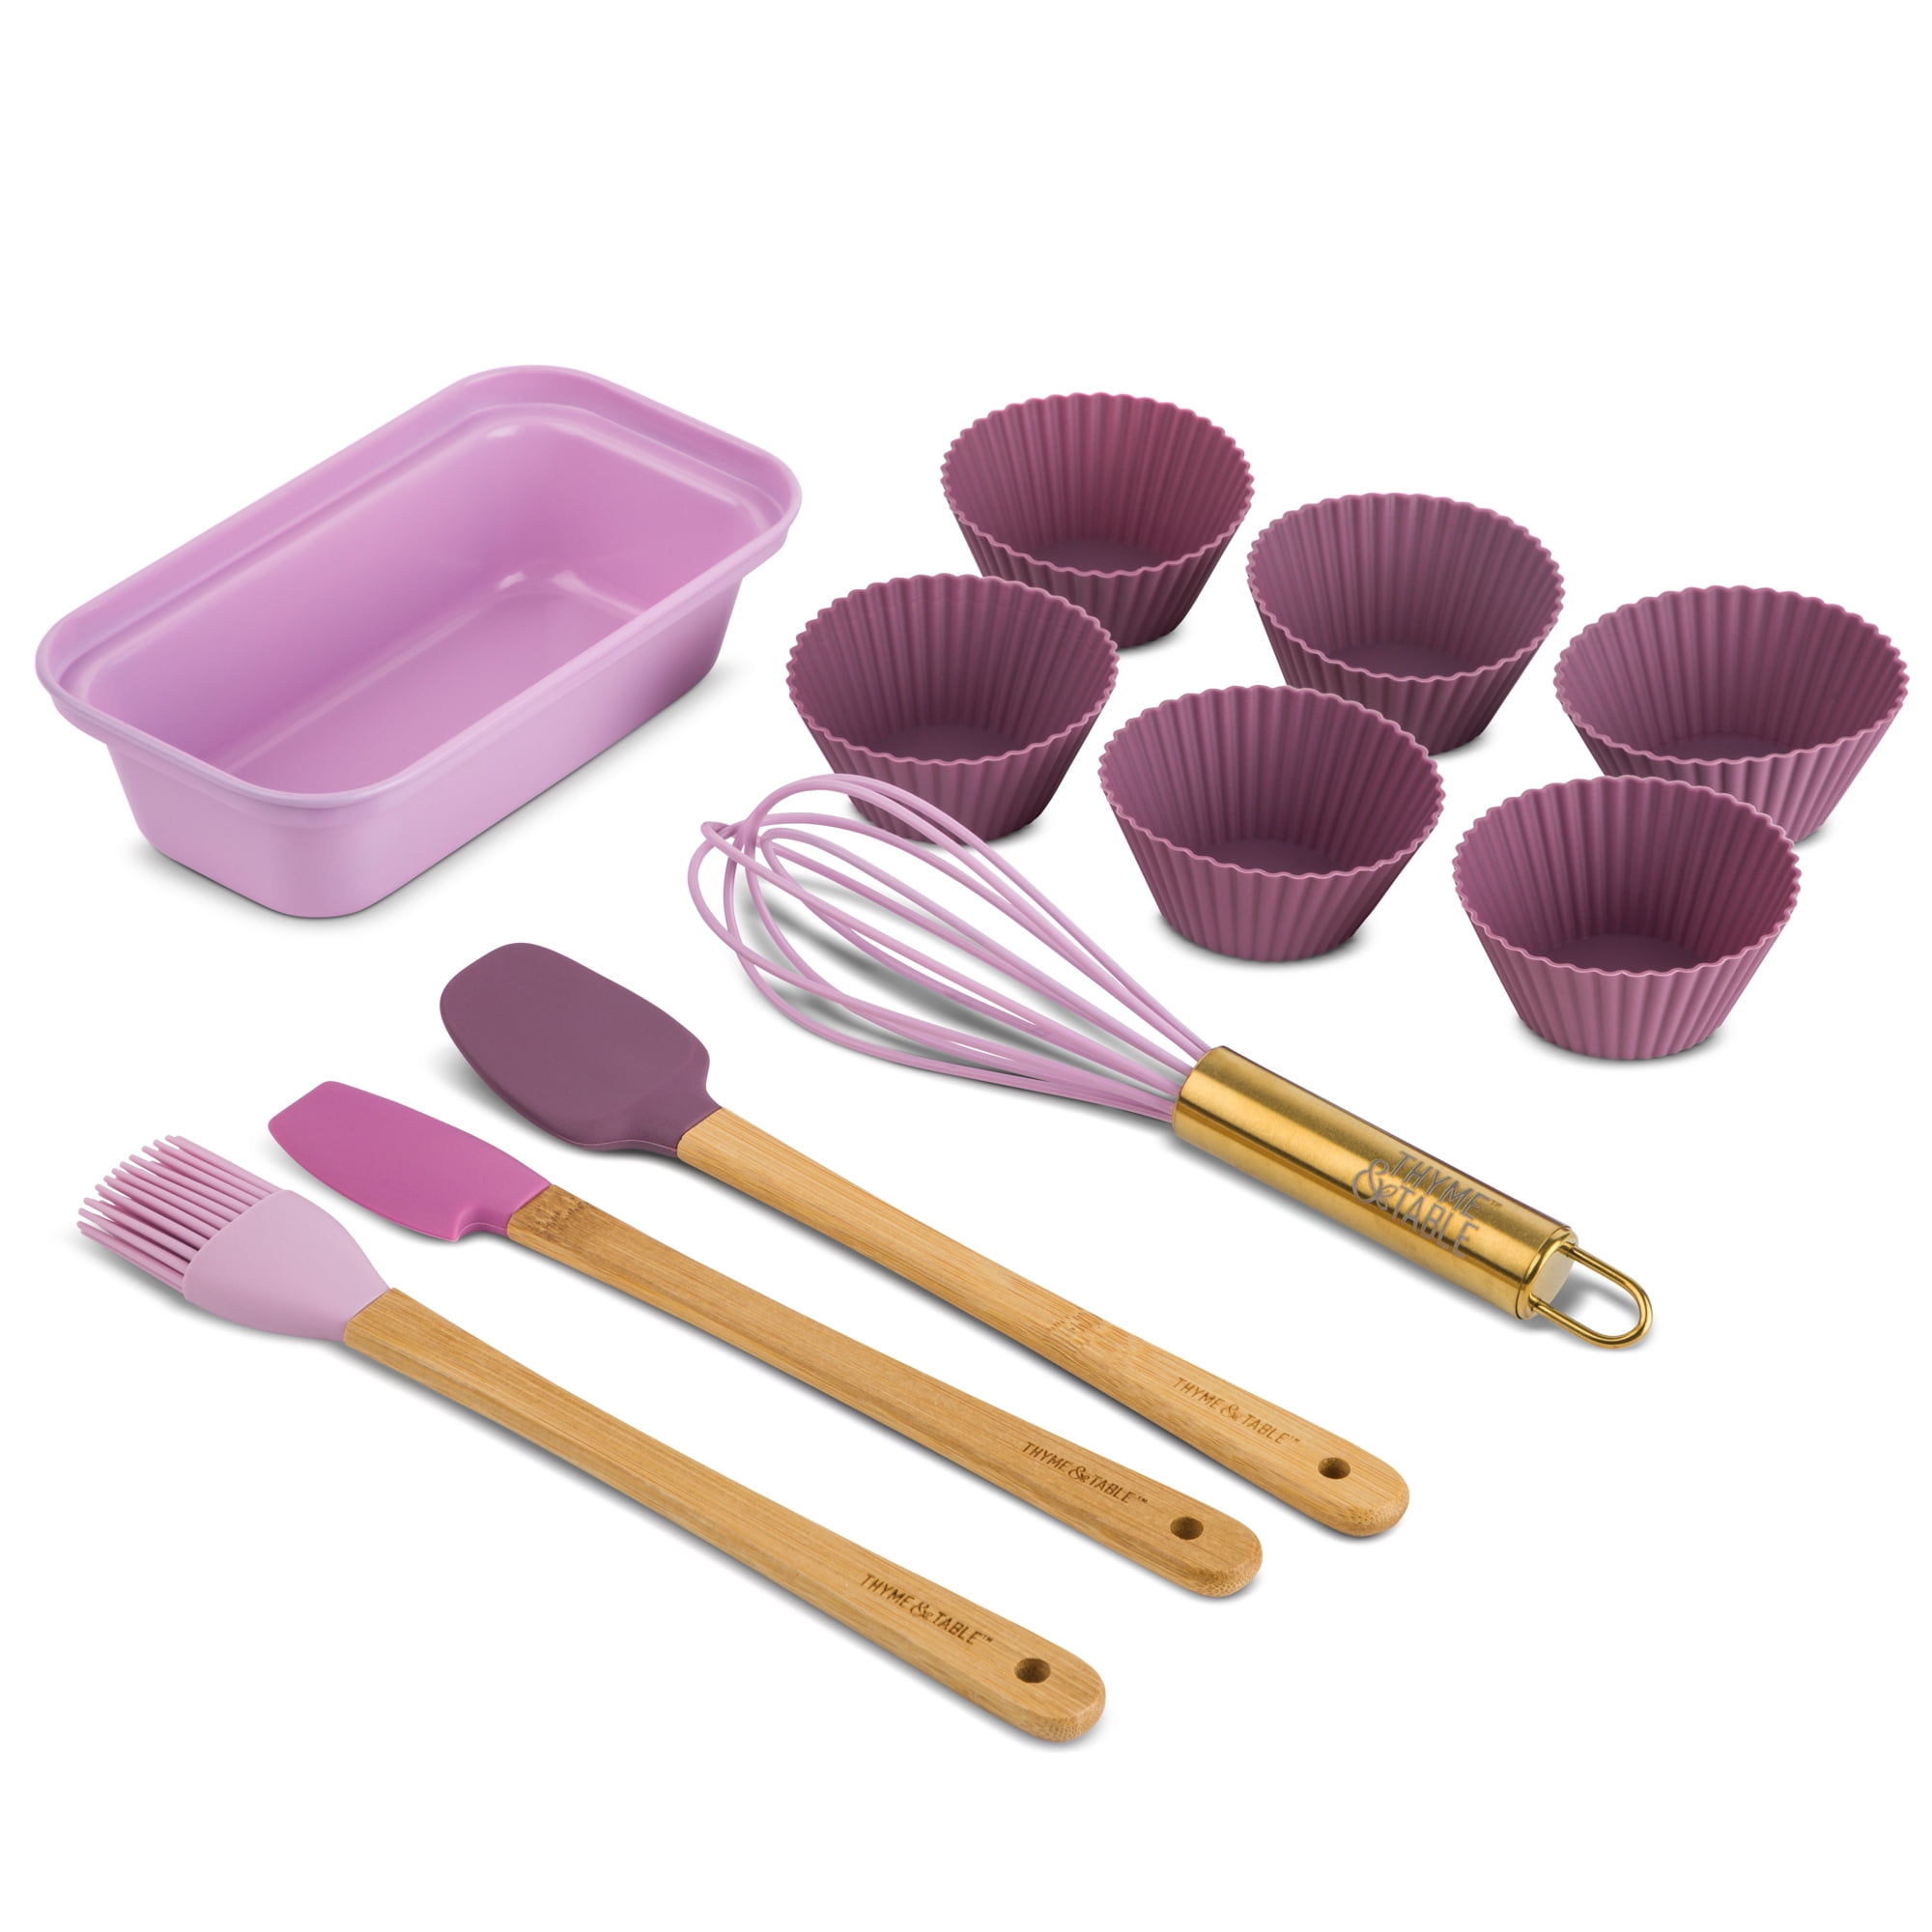 Colorful and Modern 4-Piece Mini Utensil Set by Art & Cook